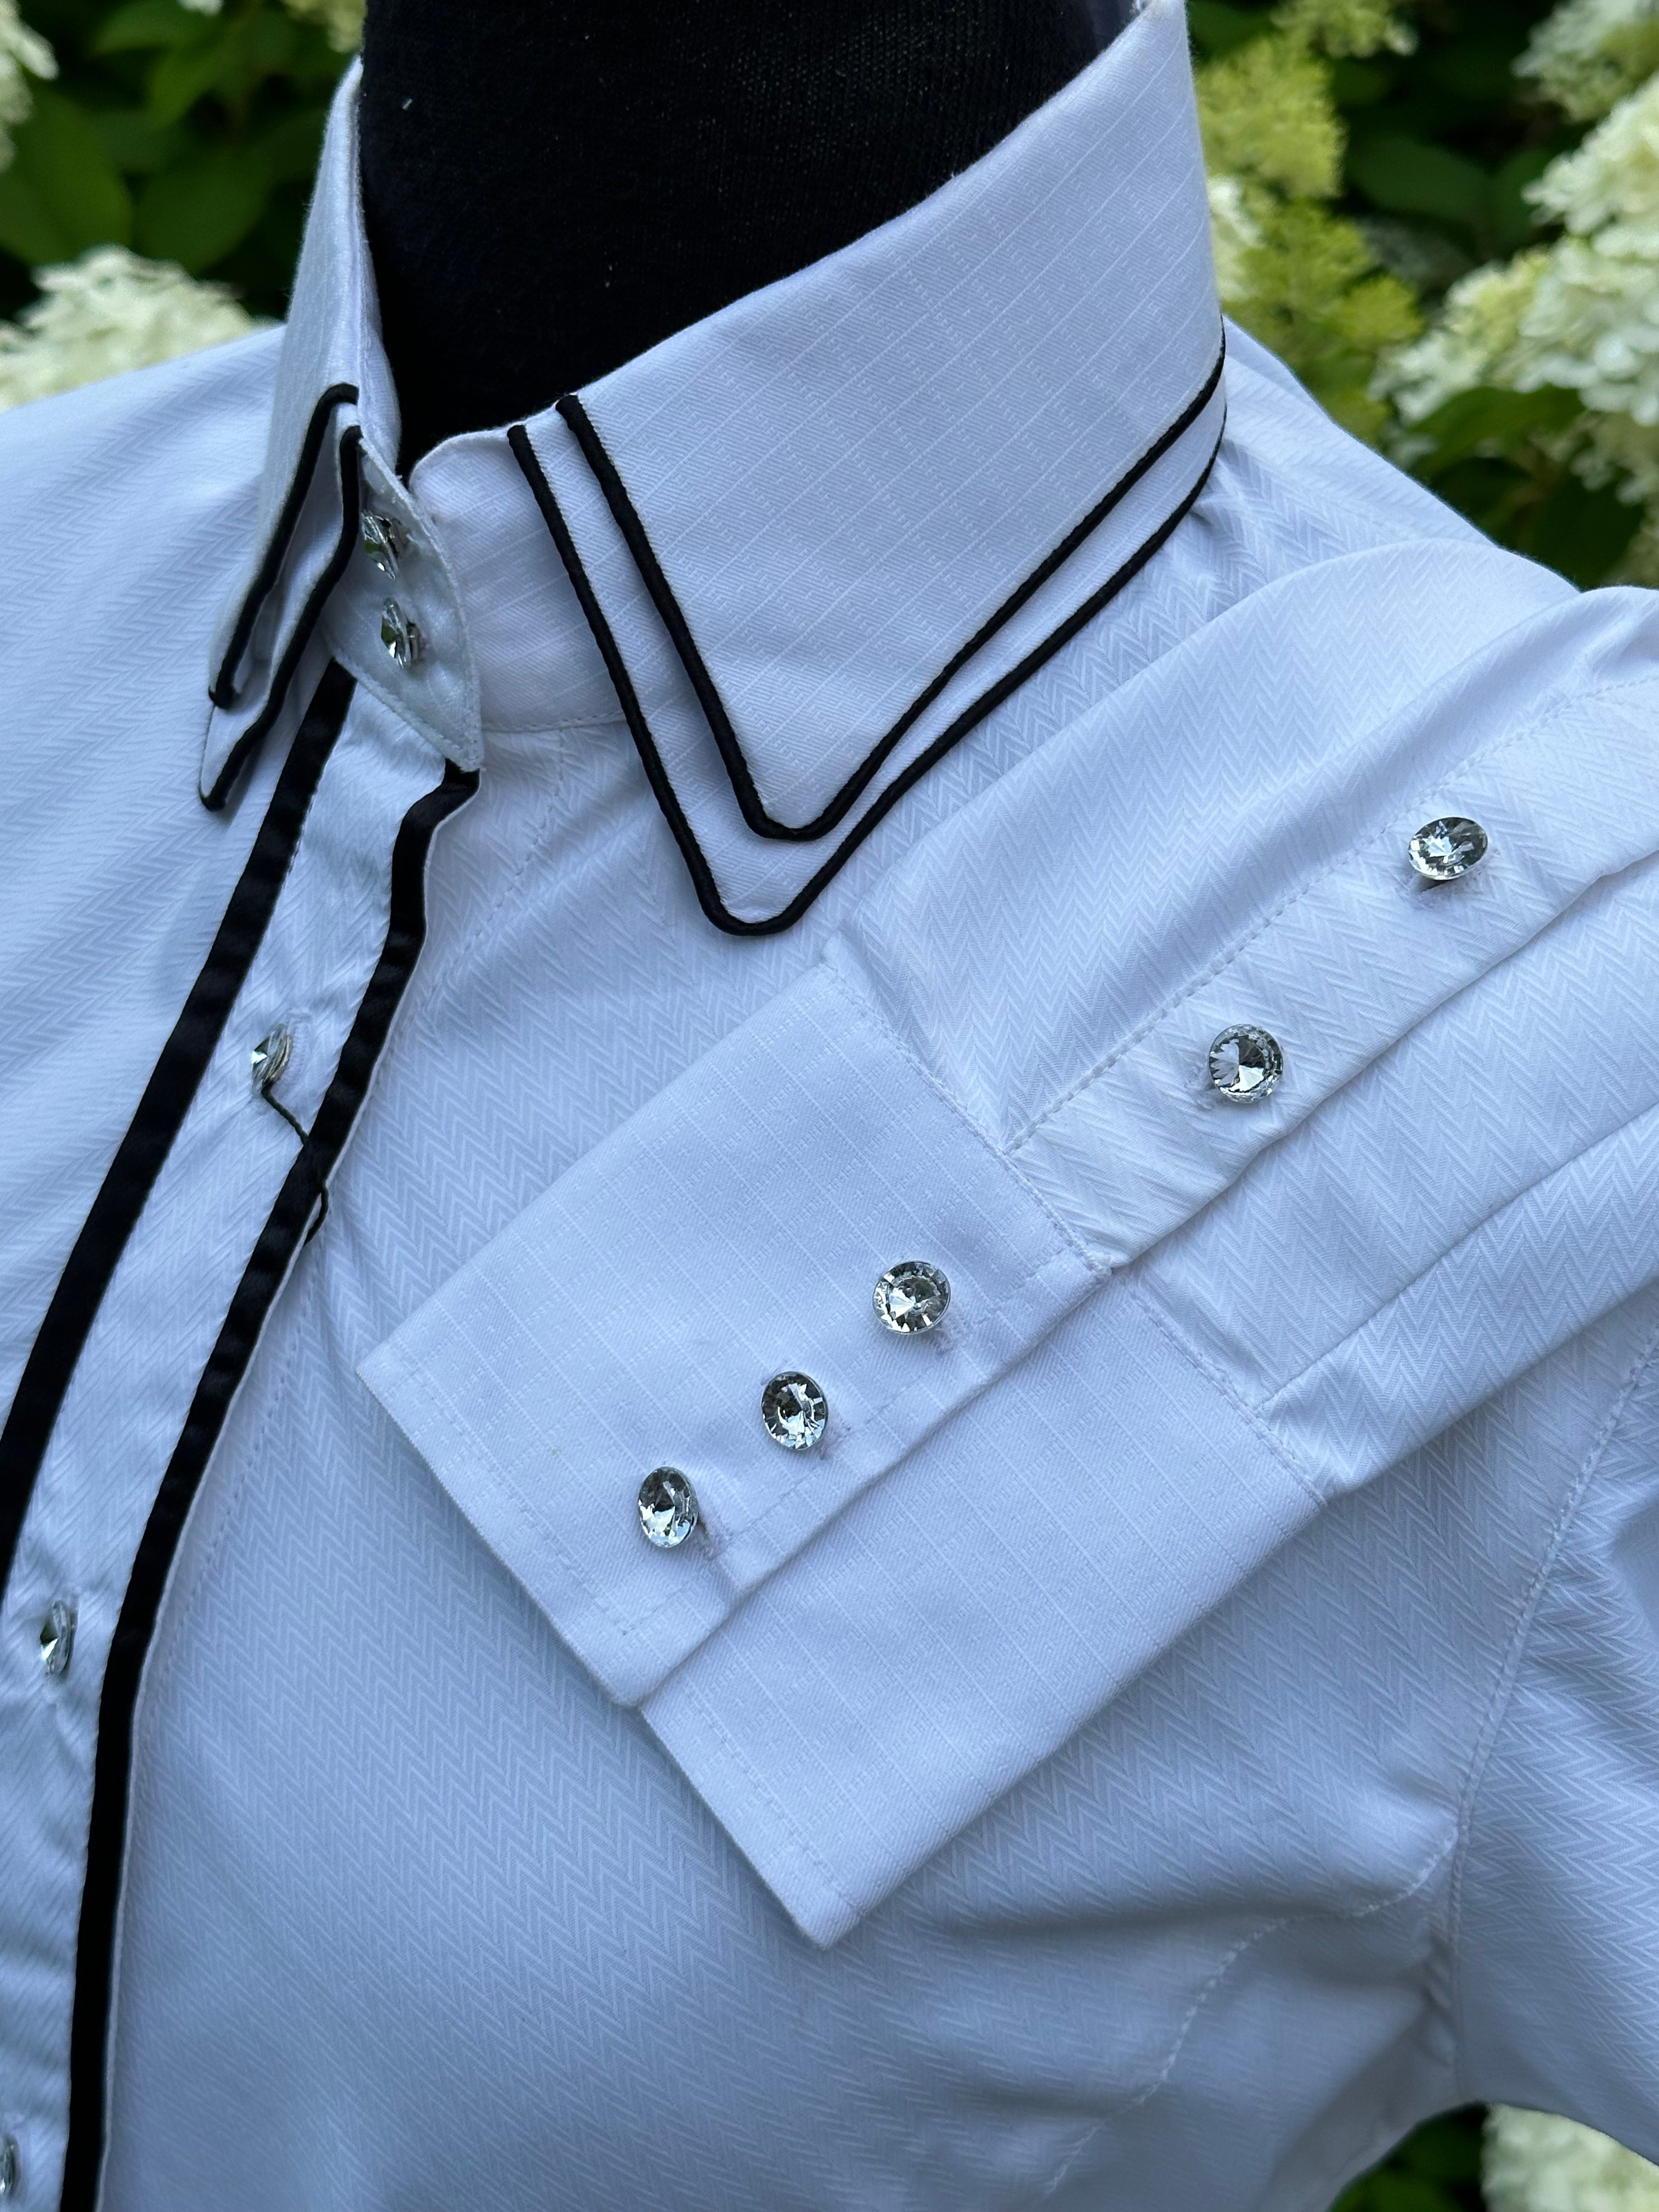 Western Button Up White with black and Crystal Buttons no